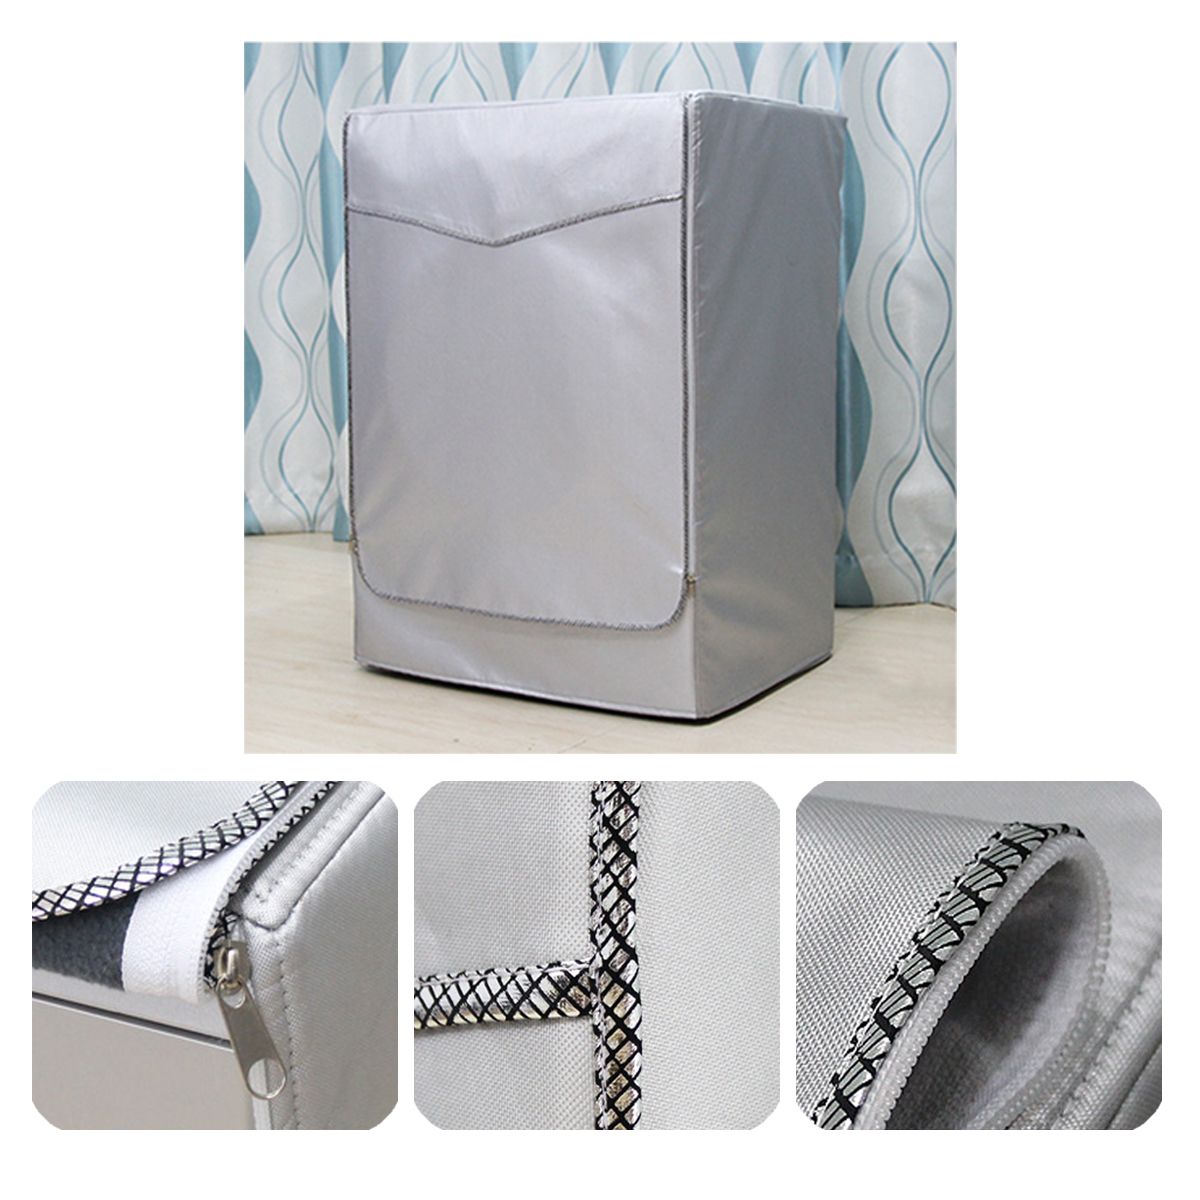 Home-Sunscreen-Washing-Machine-Cover-Laundry-Dryer-Polyester-Silver-Coating-1456358